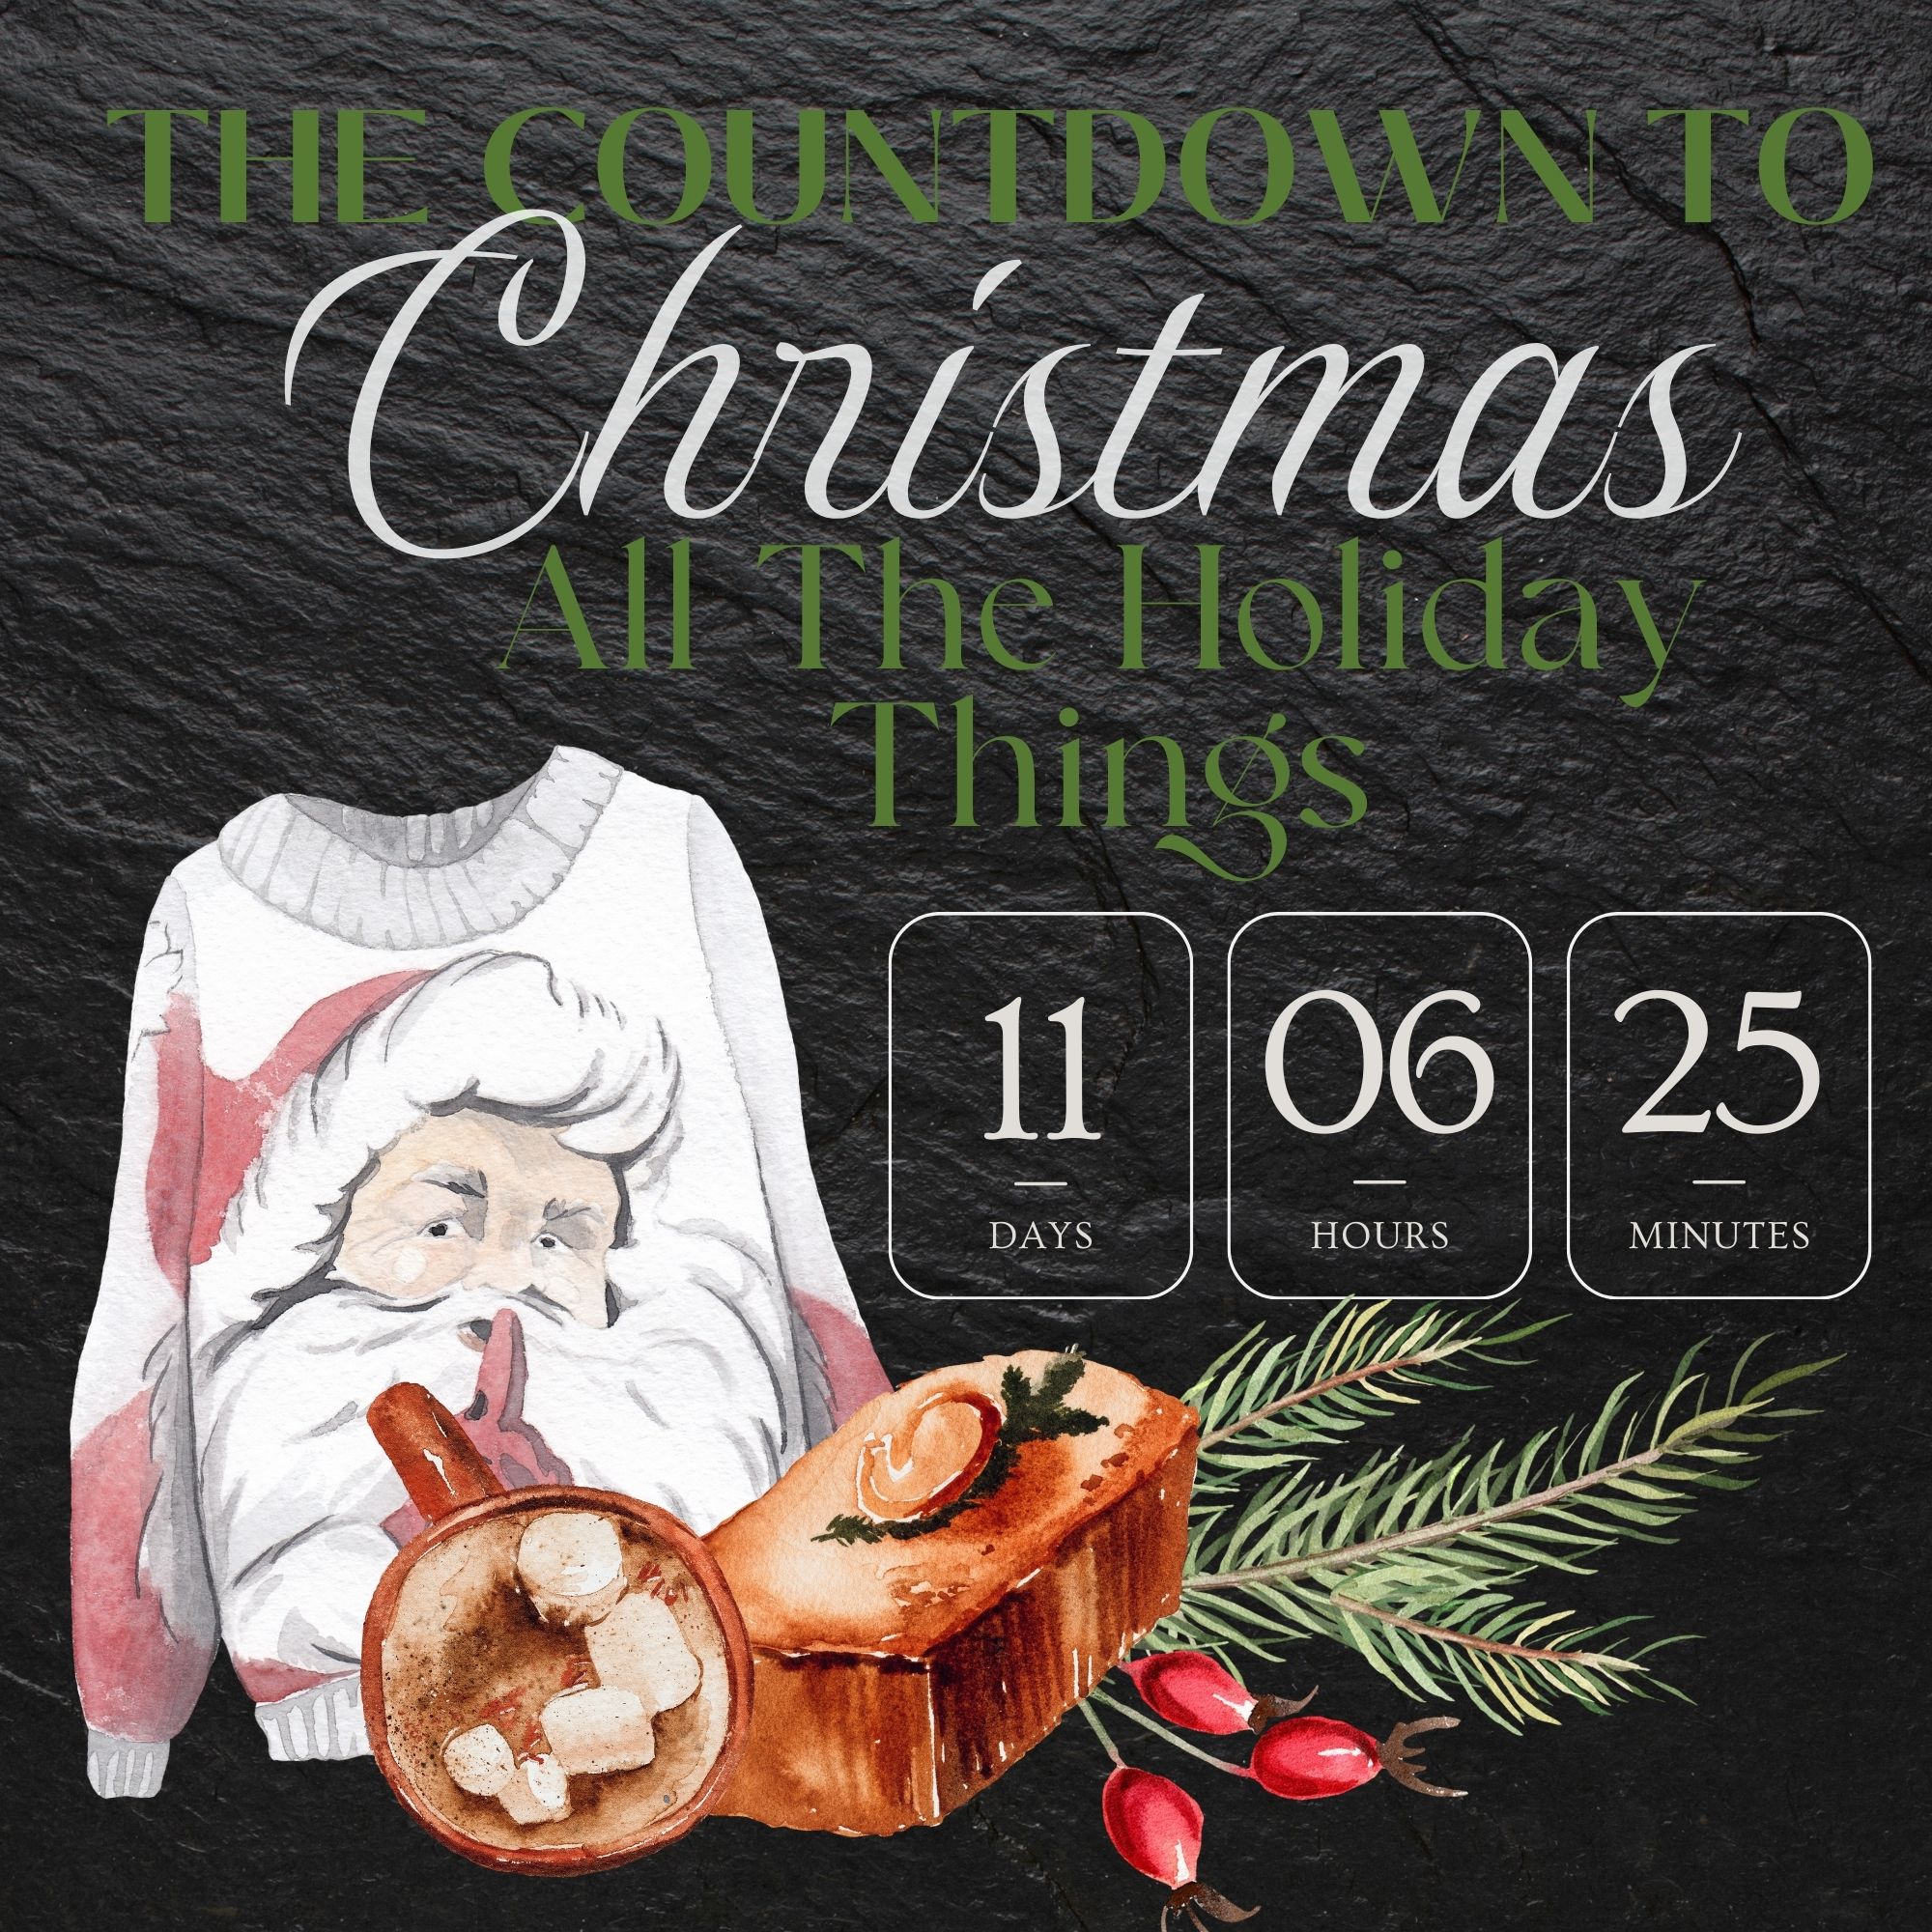 The Countdown To Christmas …All the Holiday Things